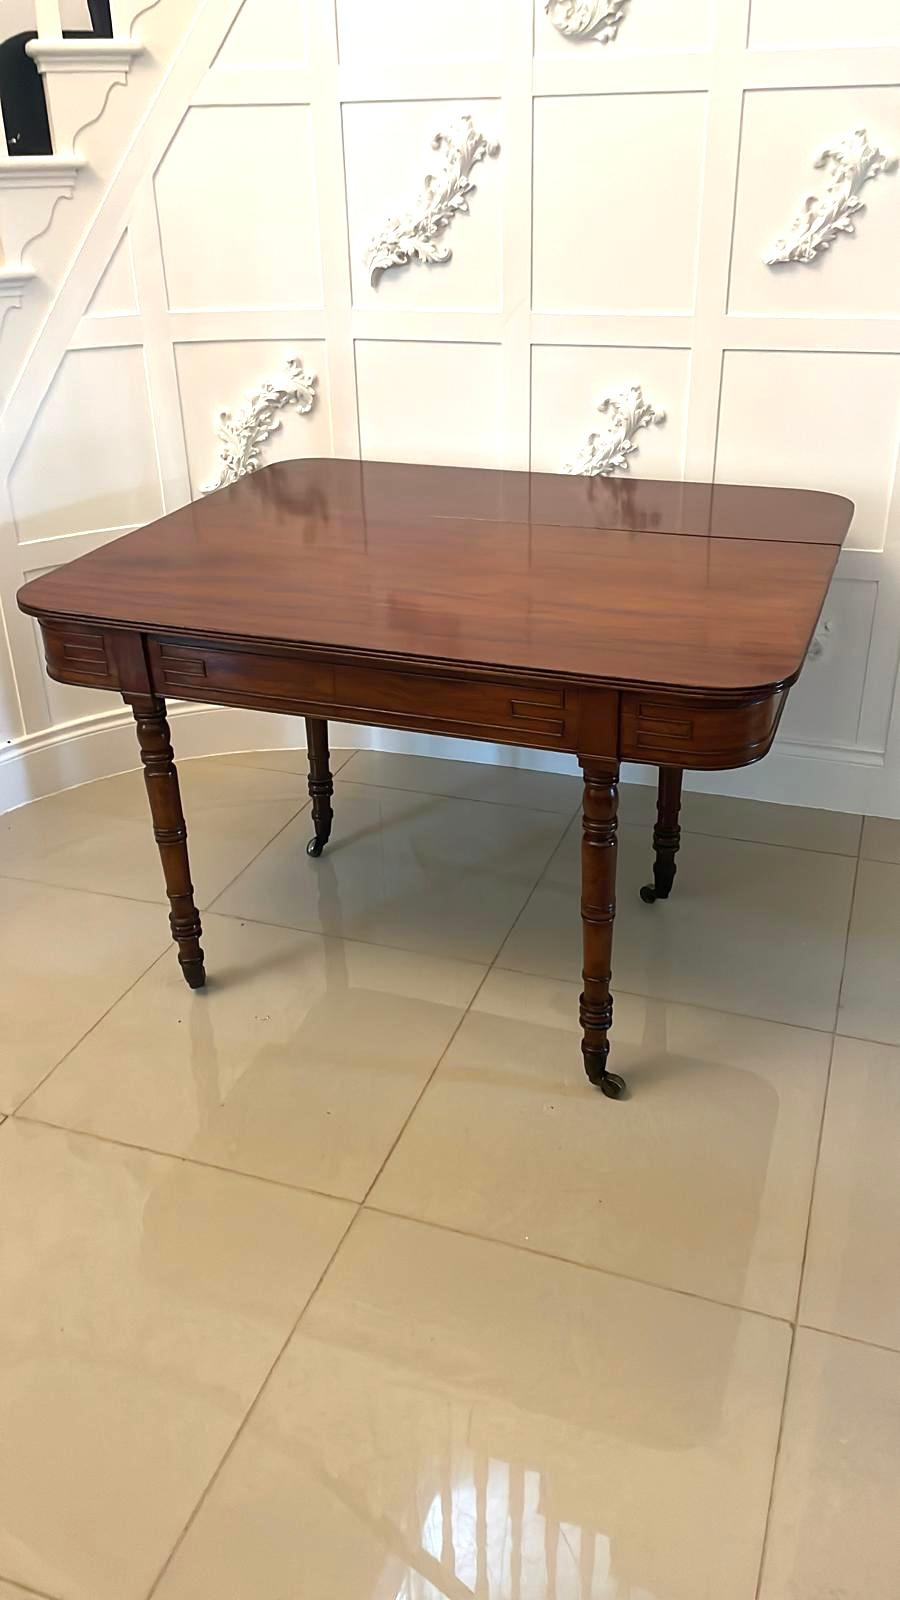 Unusual Antique George III quality mahogany console table having a quality figured mahogany top with a drop leaf making a centre or dining table with a reeded edge, mahogany frieze with Greek key beading standing on four turned tapering legs with